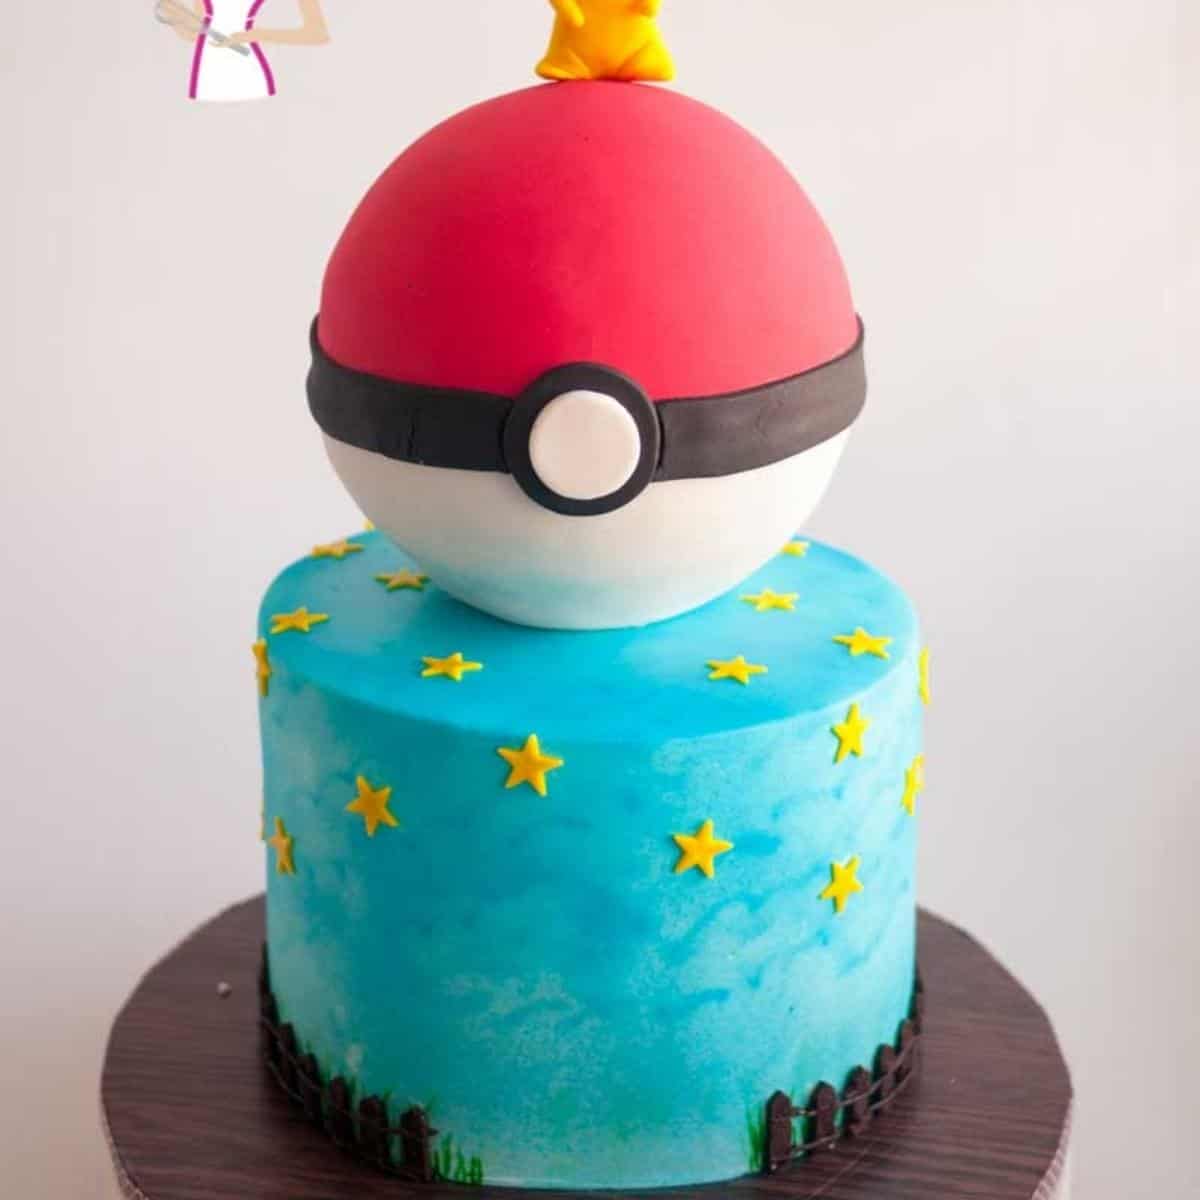 Cake decorated with fondant.